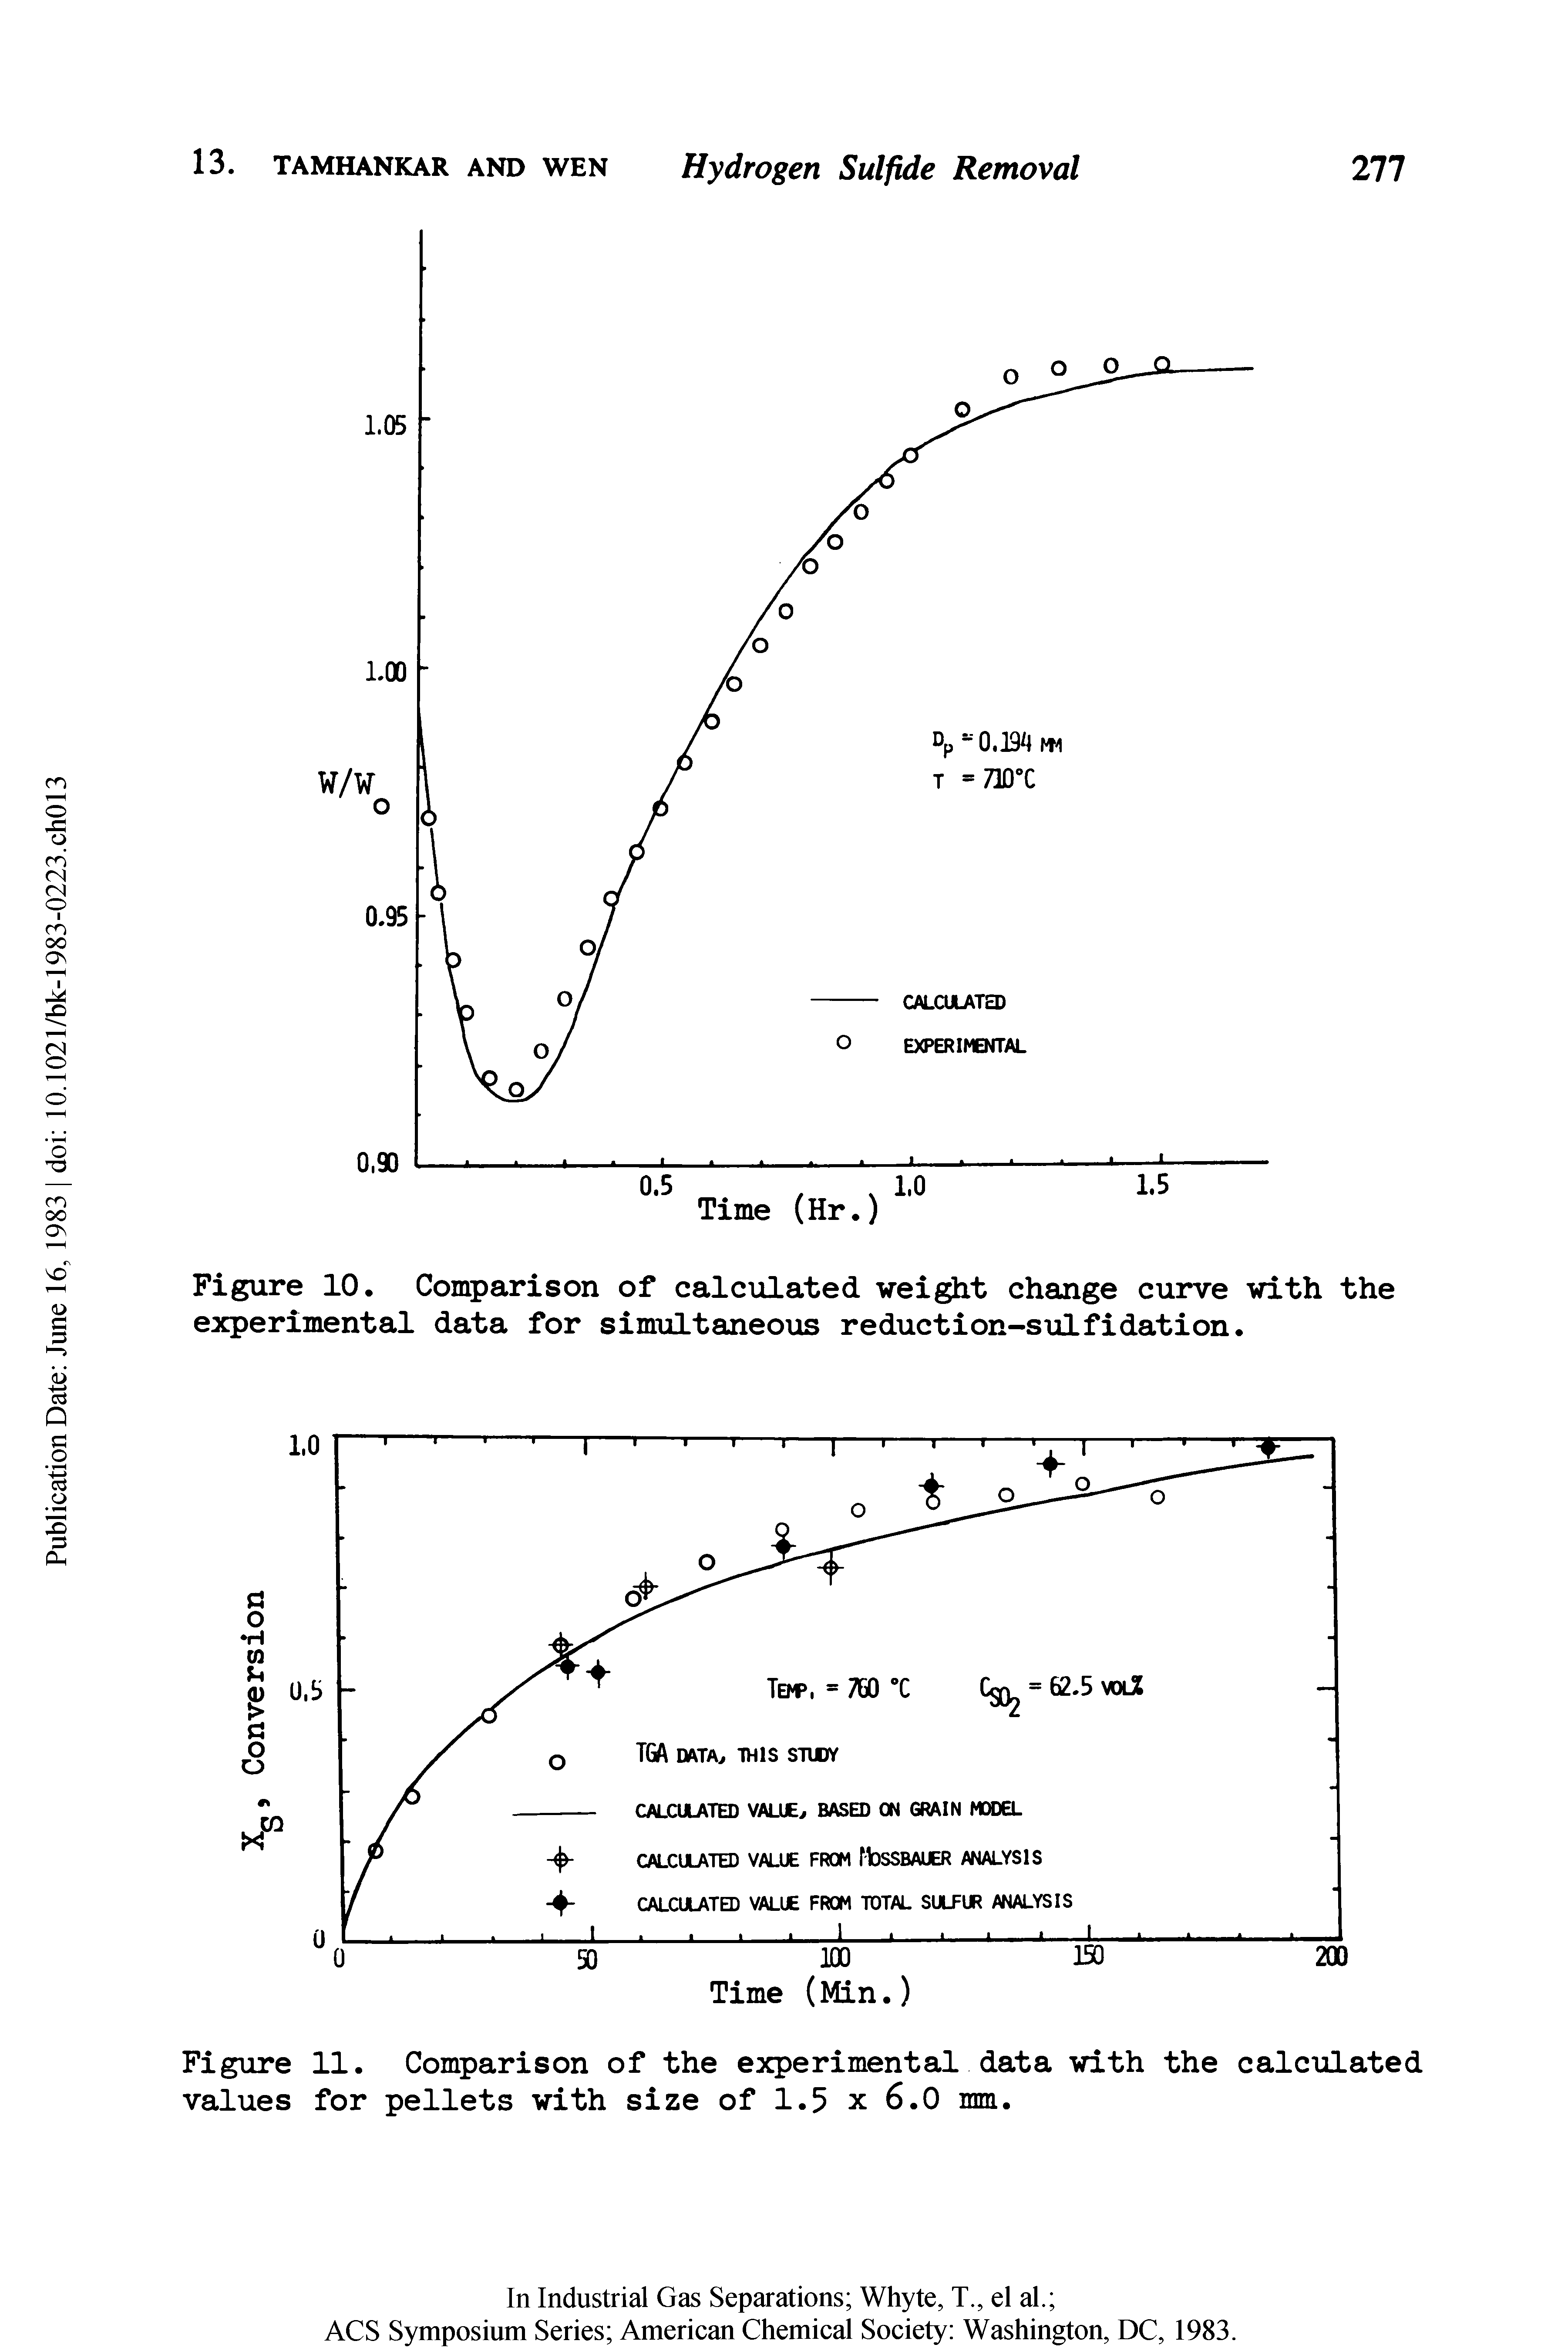 Figure 10. Comparison of calculated weight change curve with the experimental data for simultaneous reduction-sulfidation.